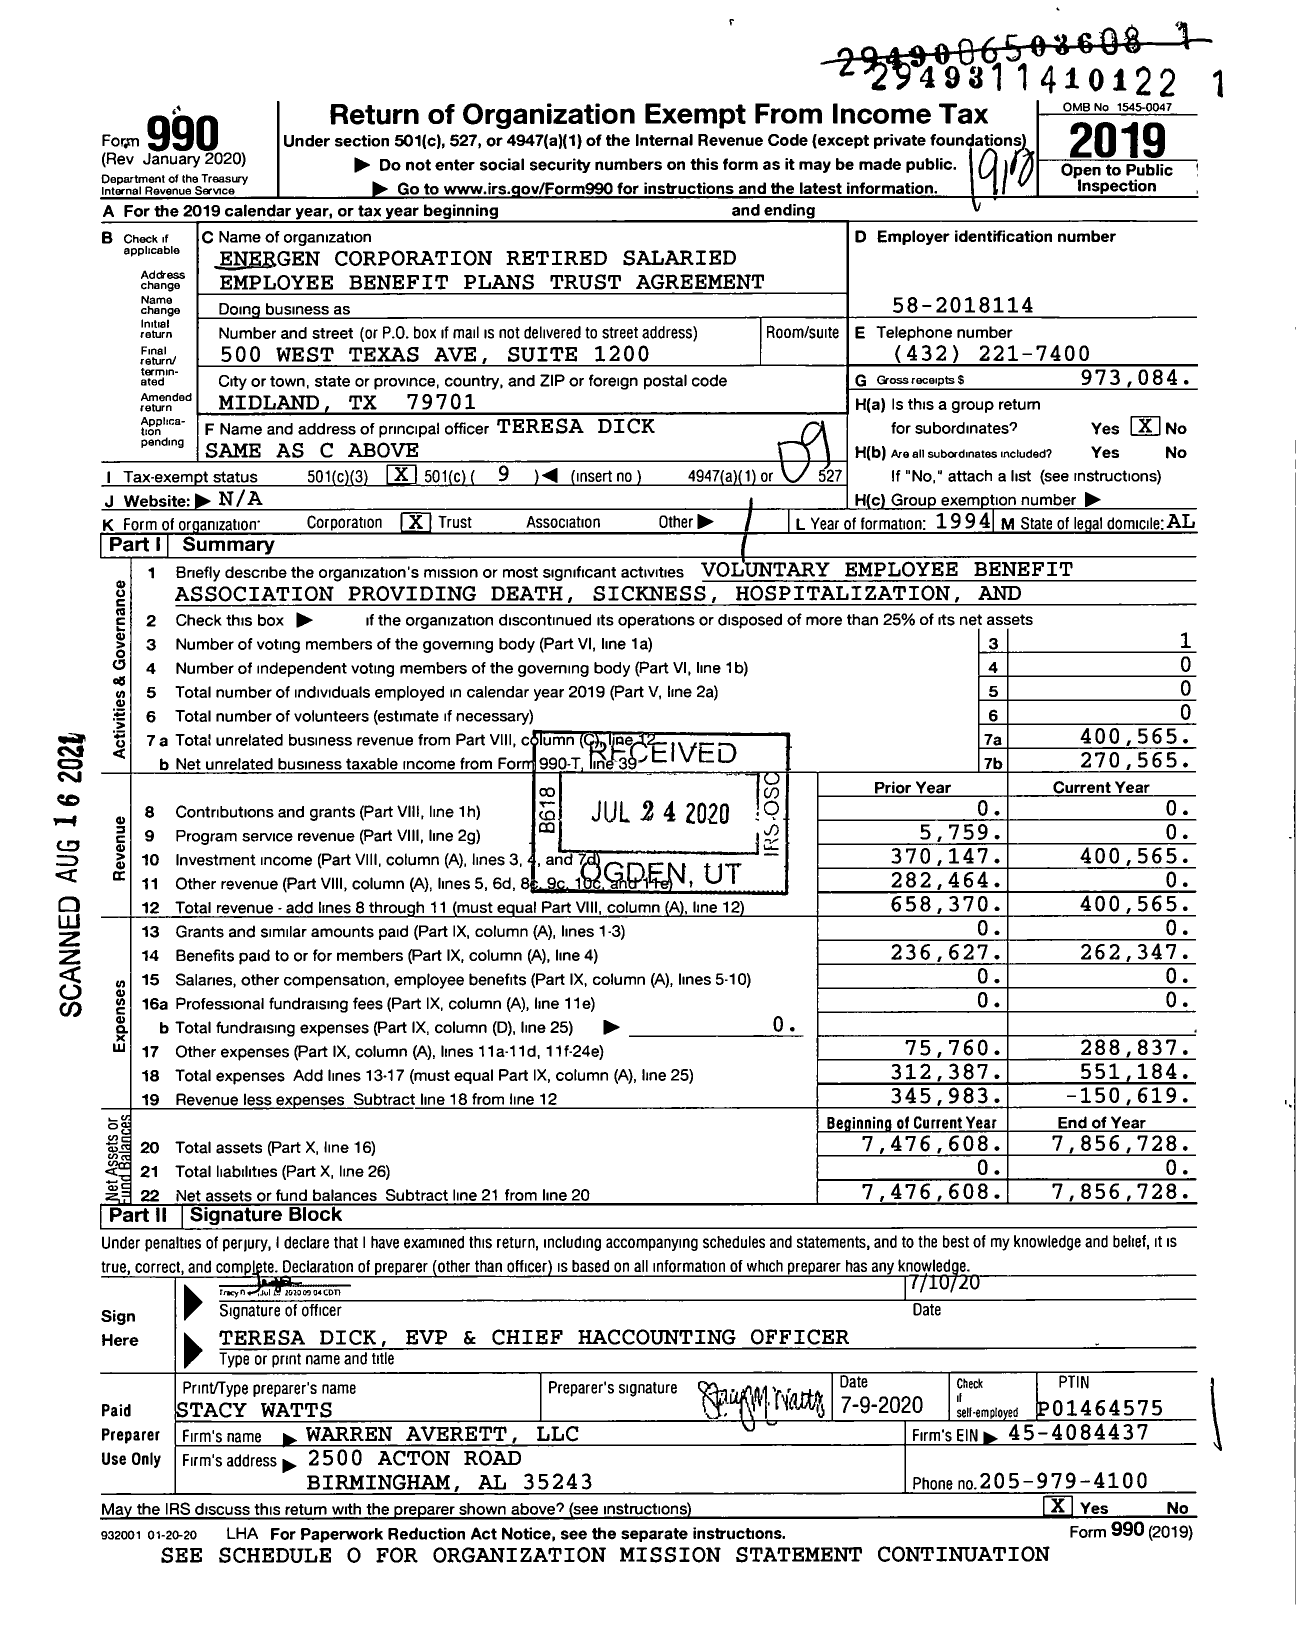 Image of first page of 2019 Form 990O for Energen Corporation Retired Salaried Employee Benefit Plans Trust Agreement